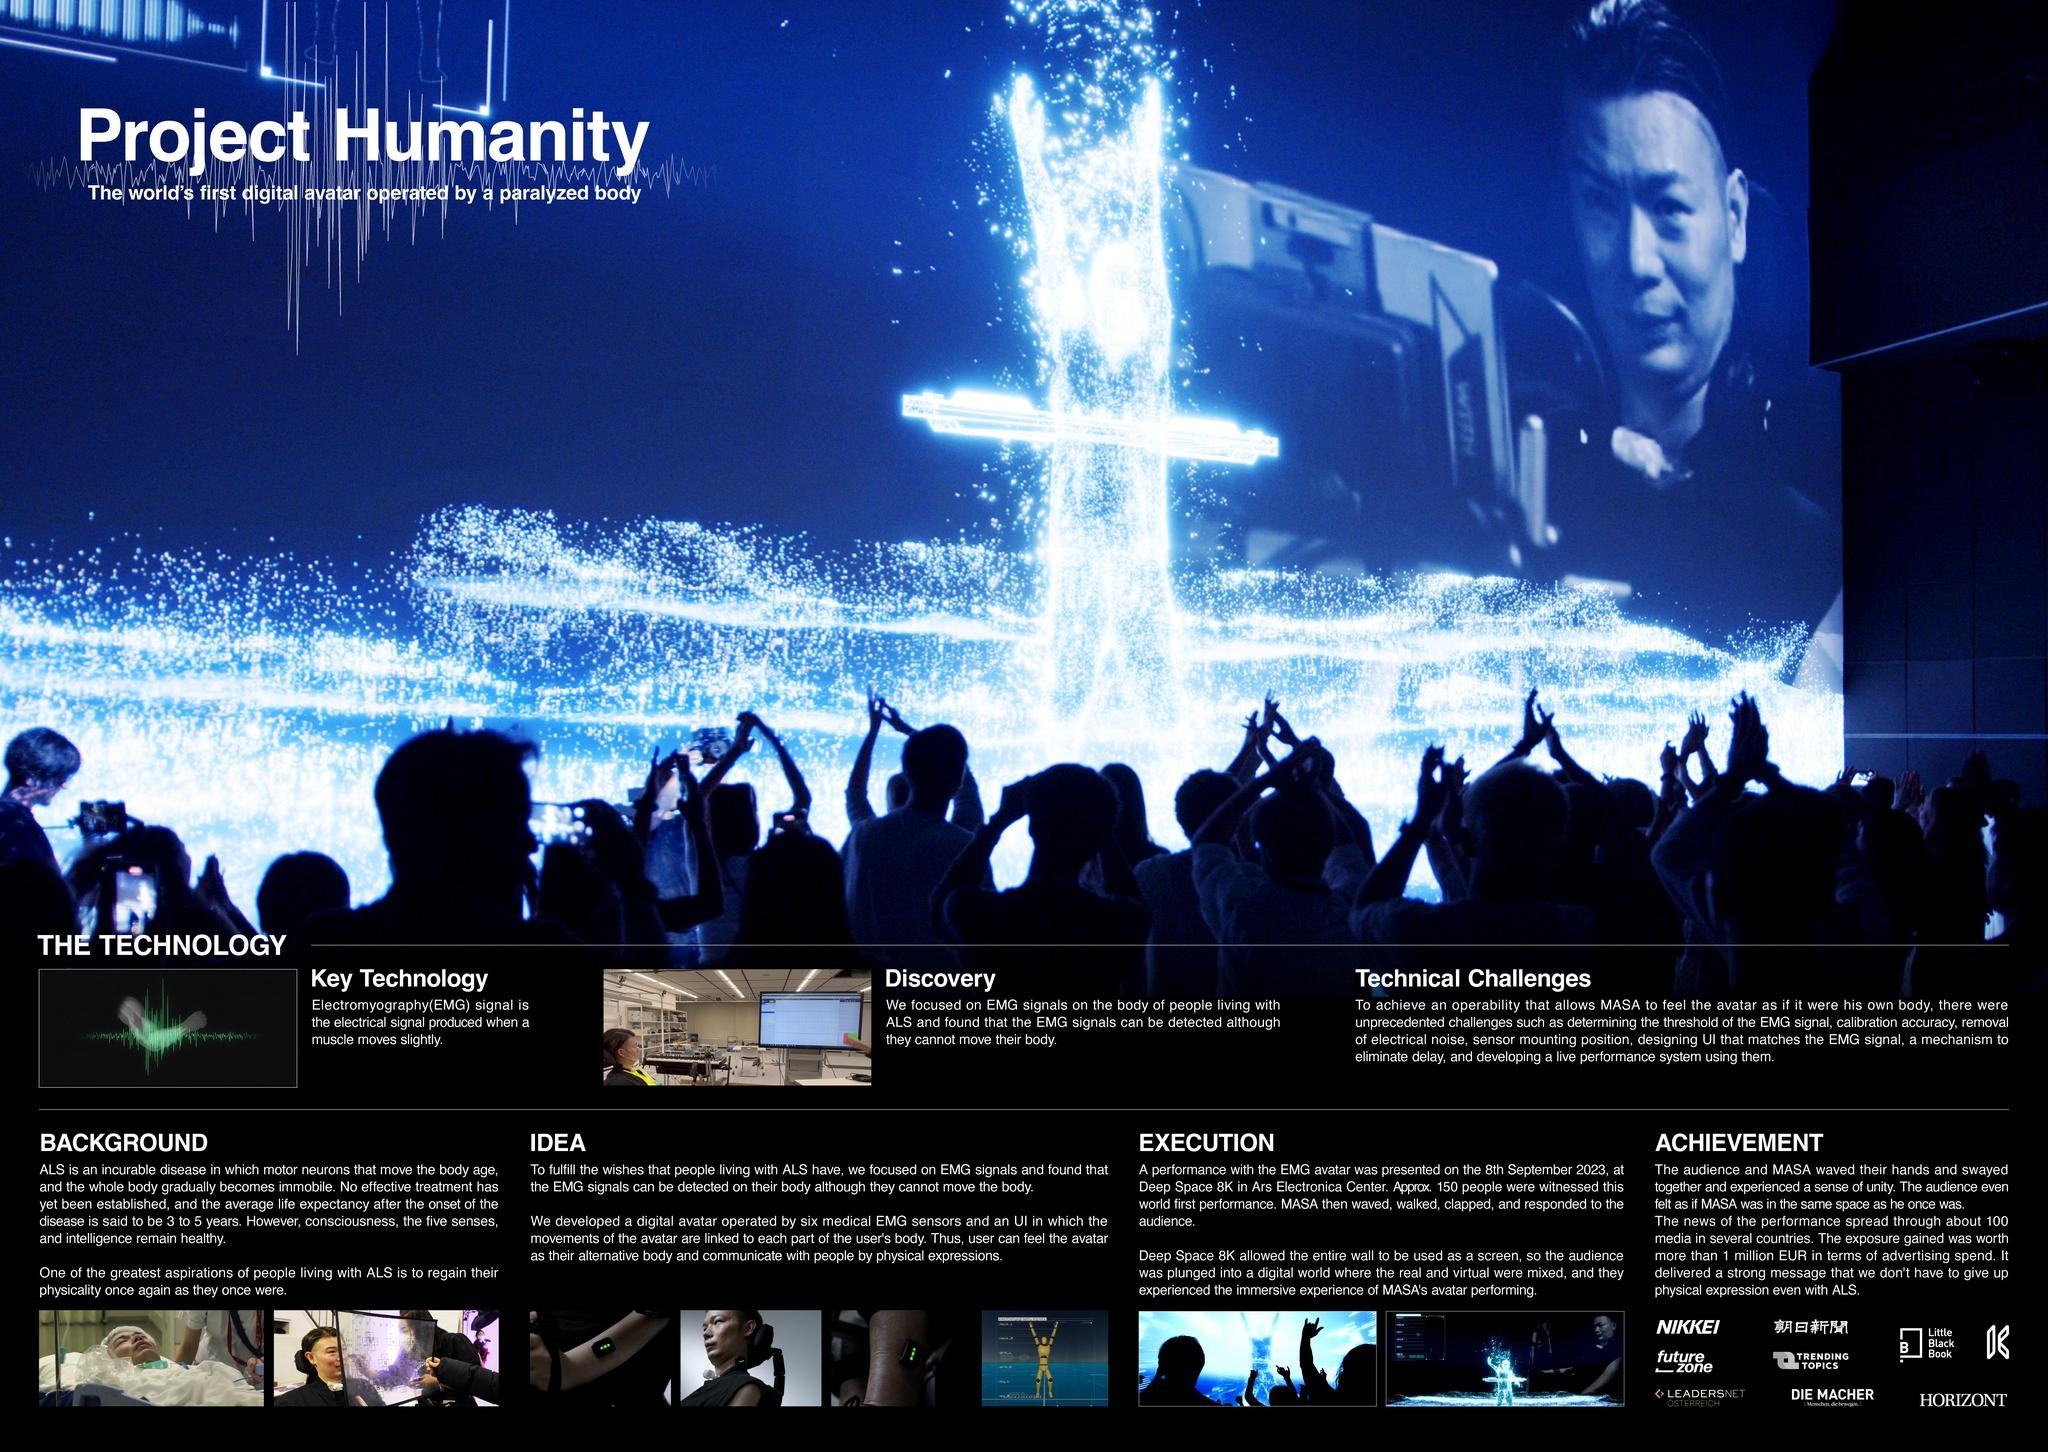 PROJECT HUMANITY